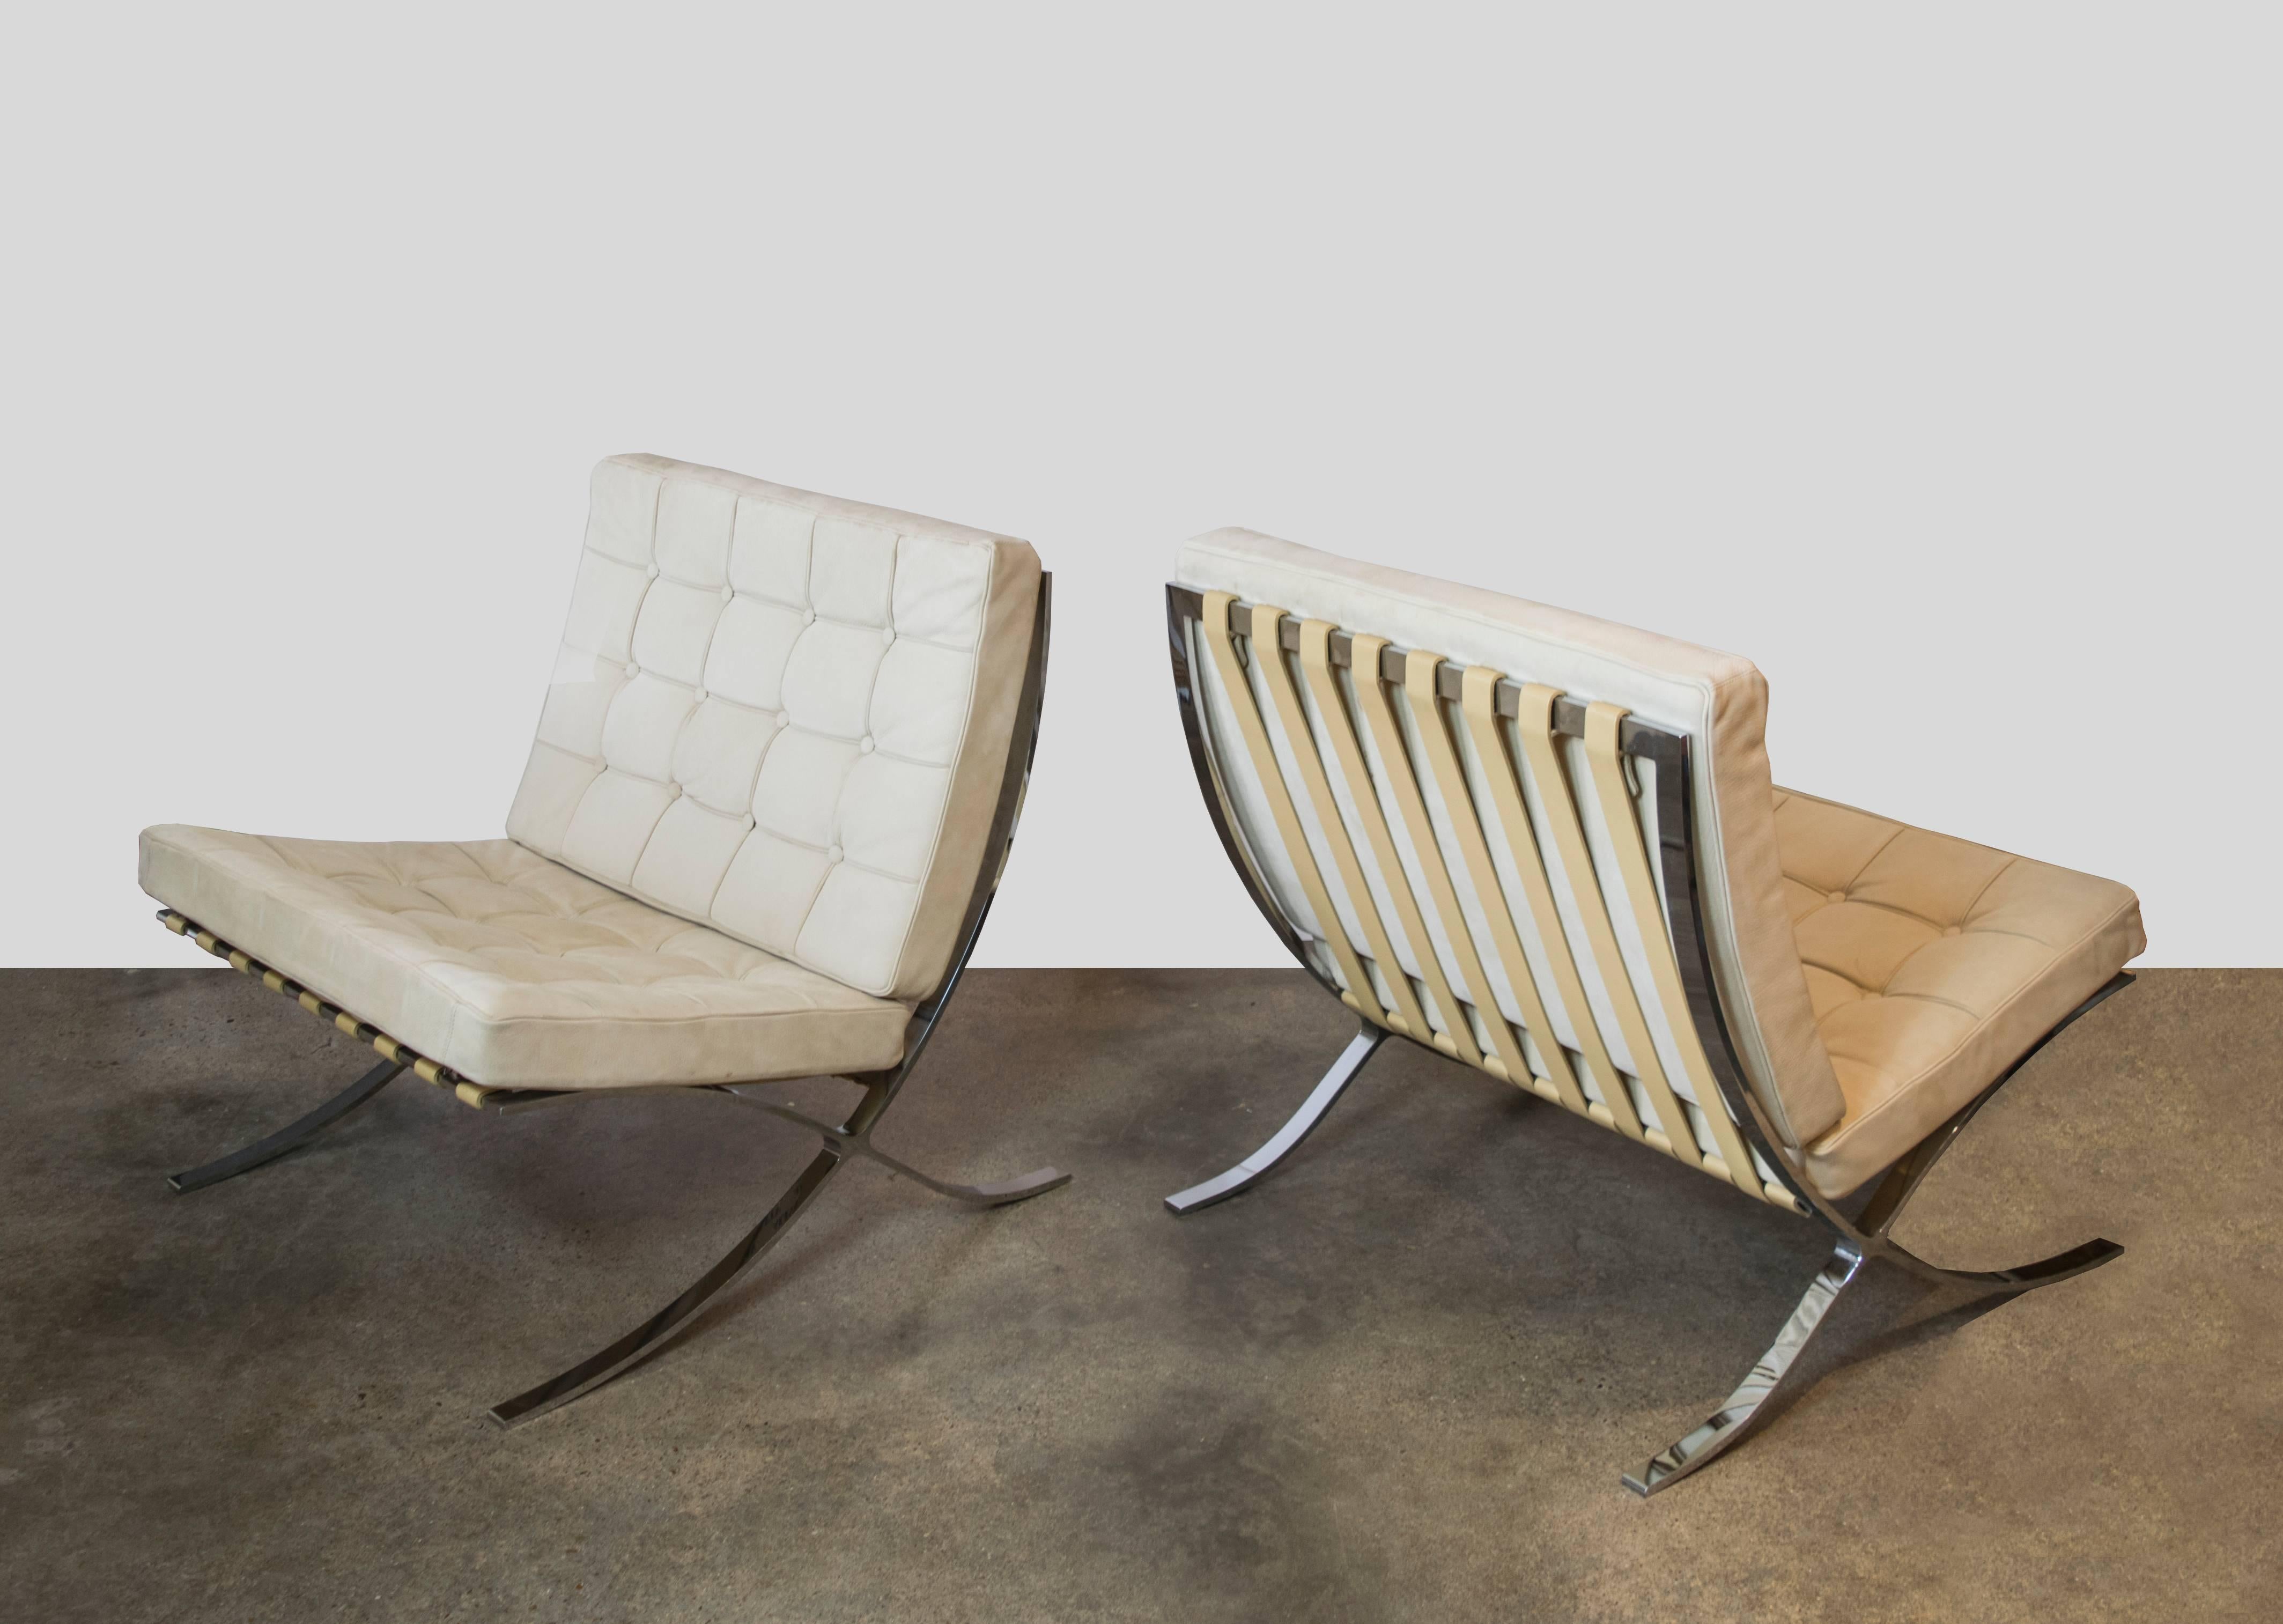 Excellent pair of creamy nubuck leather Barcelona chairs from the 1990s manufactured by Alivar, an Italian representative for Knoll. All of the original leather straps, snaps and buckles attached to the seat cushions are in excellent condition.